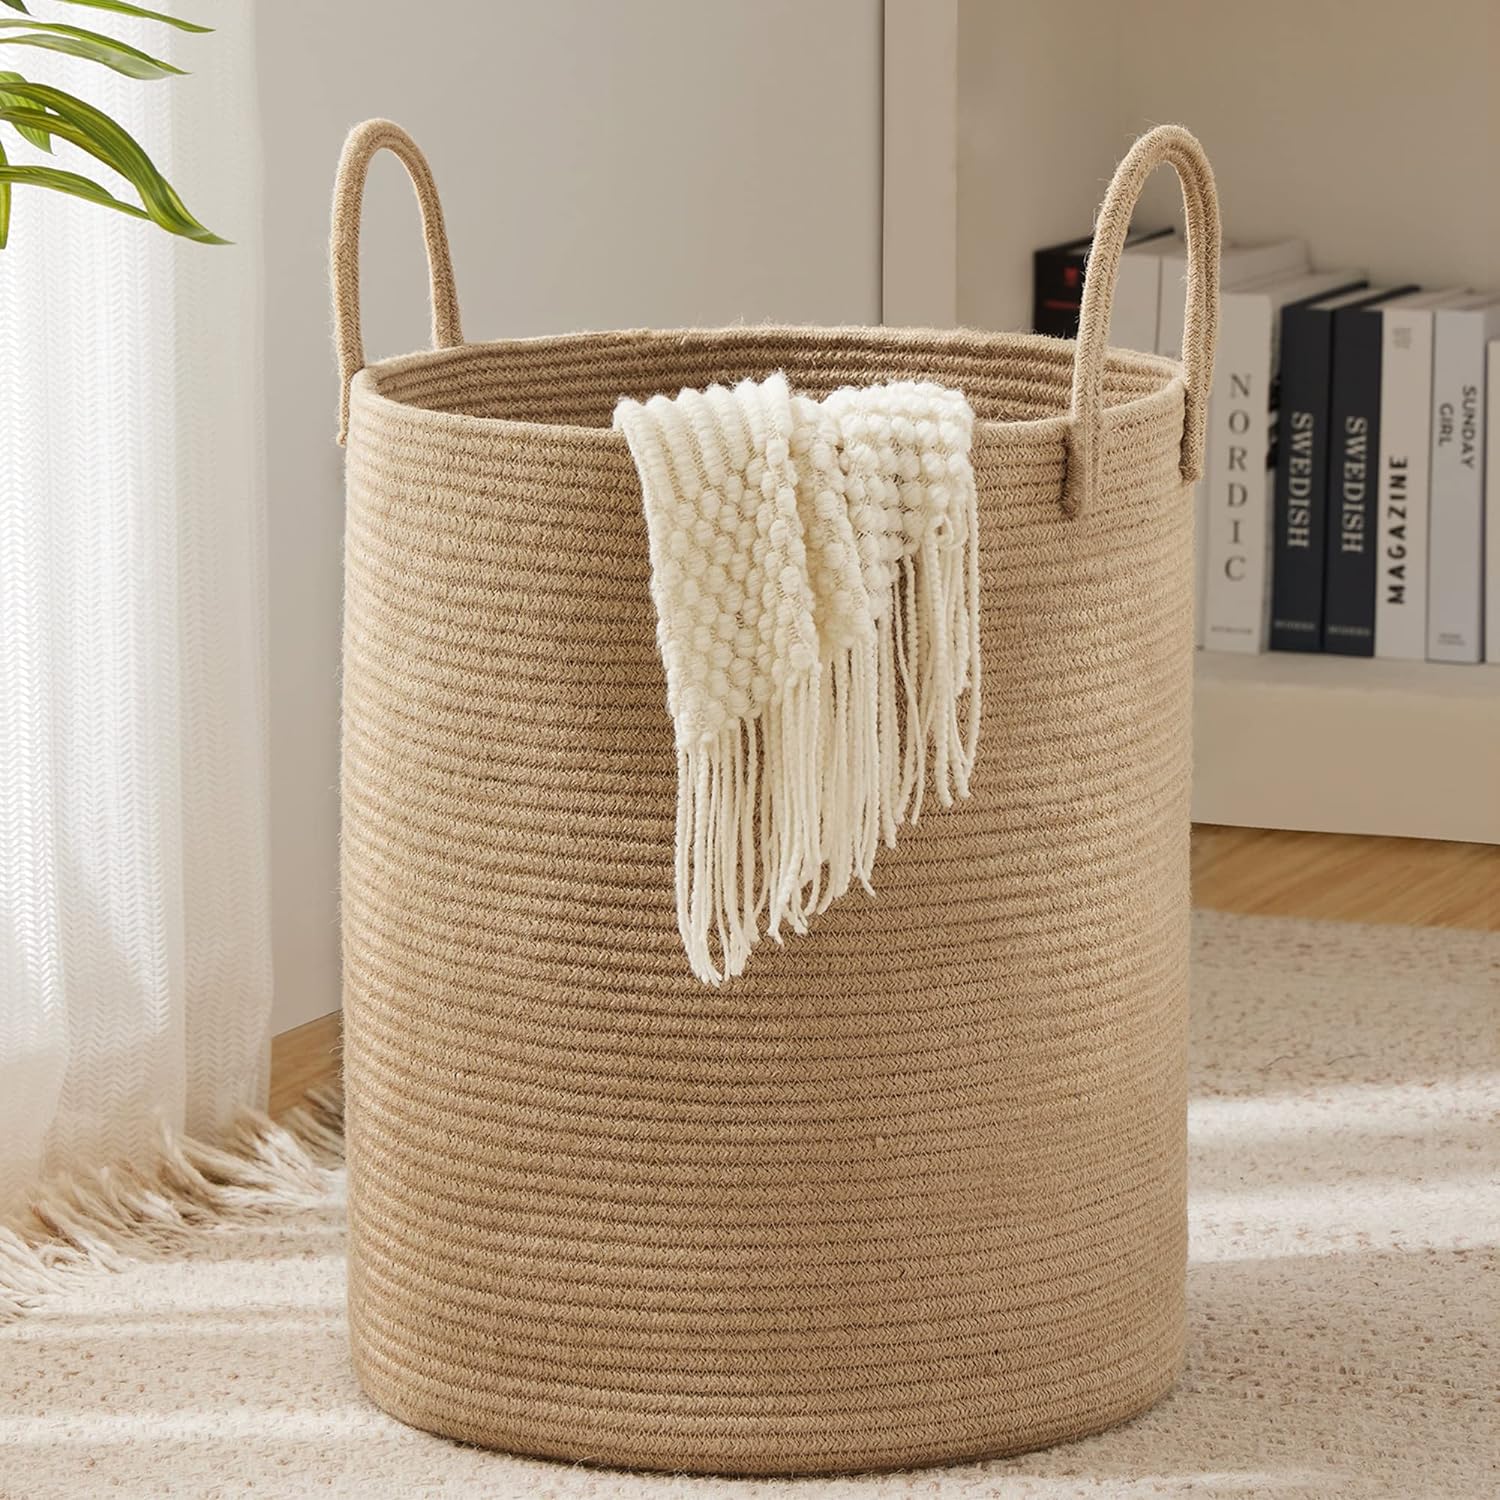 Great basket. I have used it to store my throw blankets in the living room fits alot & looks nice. Was minimal creasing and seems to be circling out with the blankets in it.